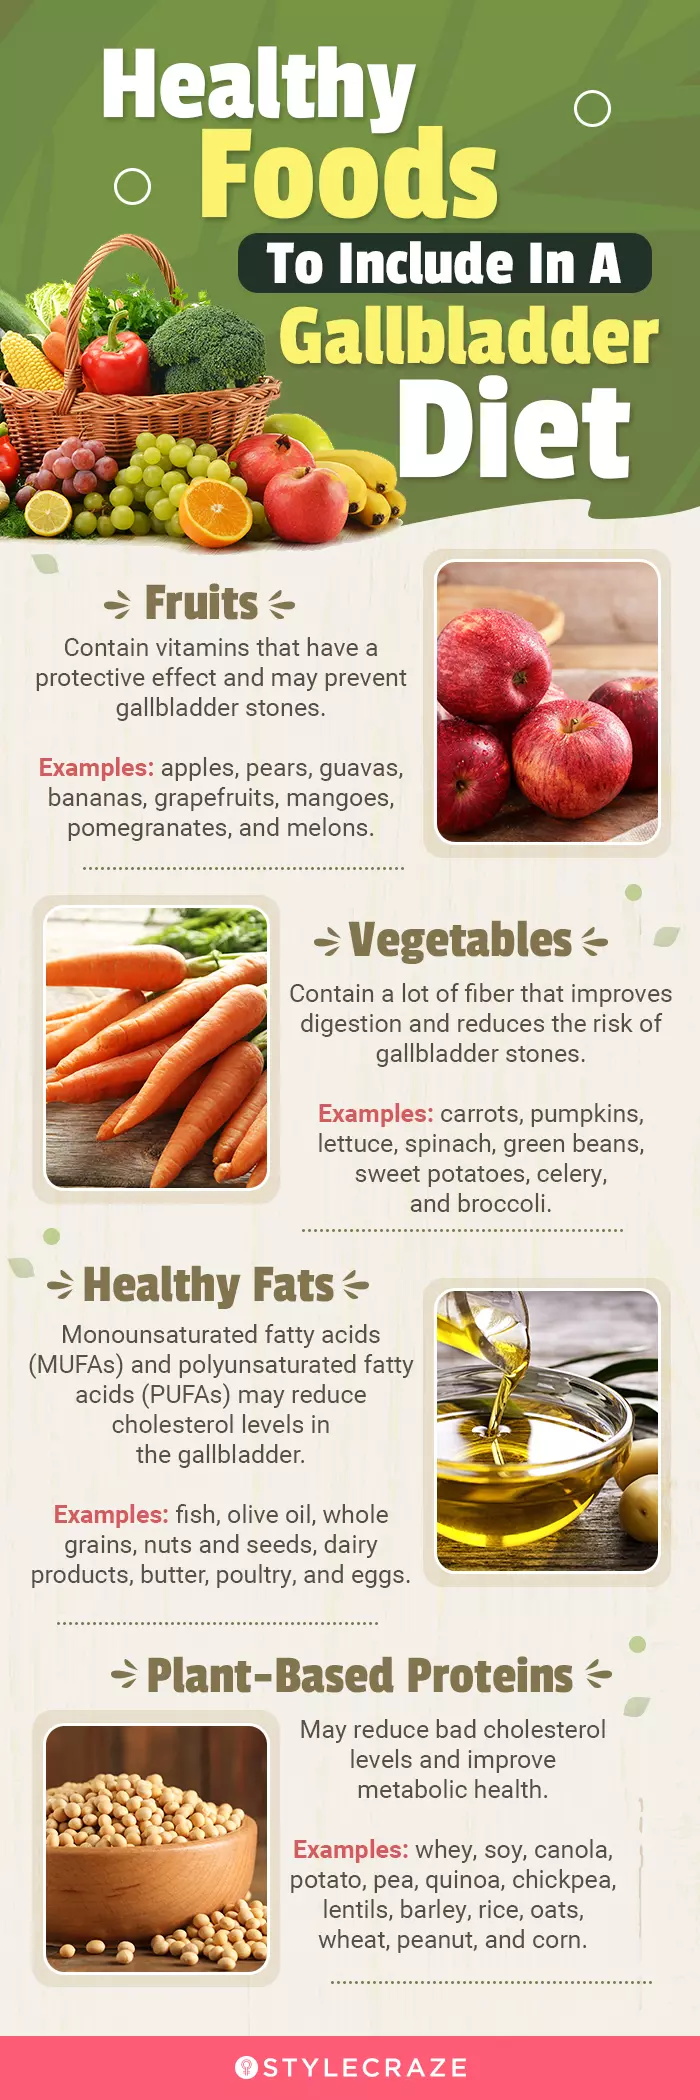 healthy foods to include in a gallbladder diet (infographic)